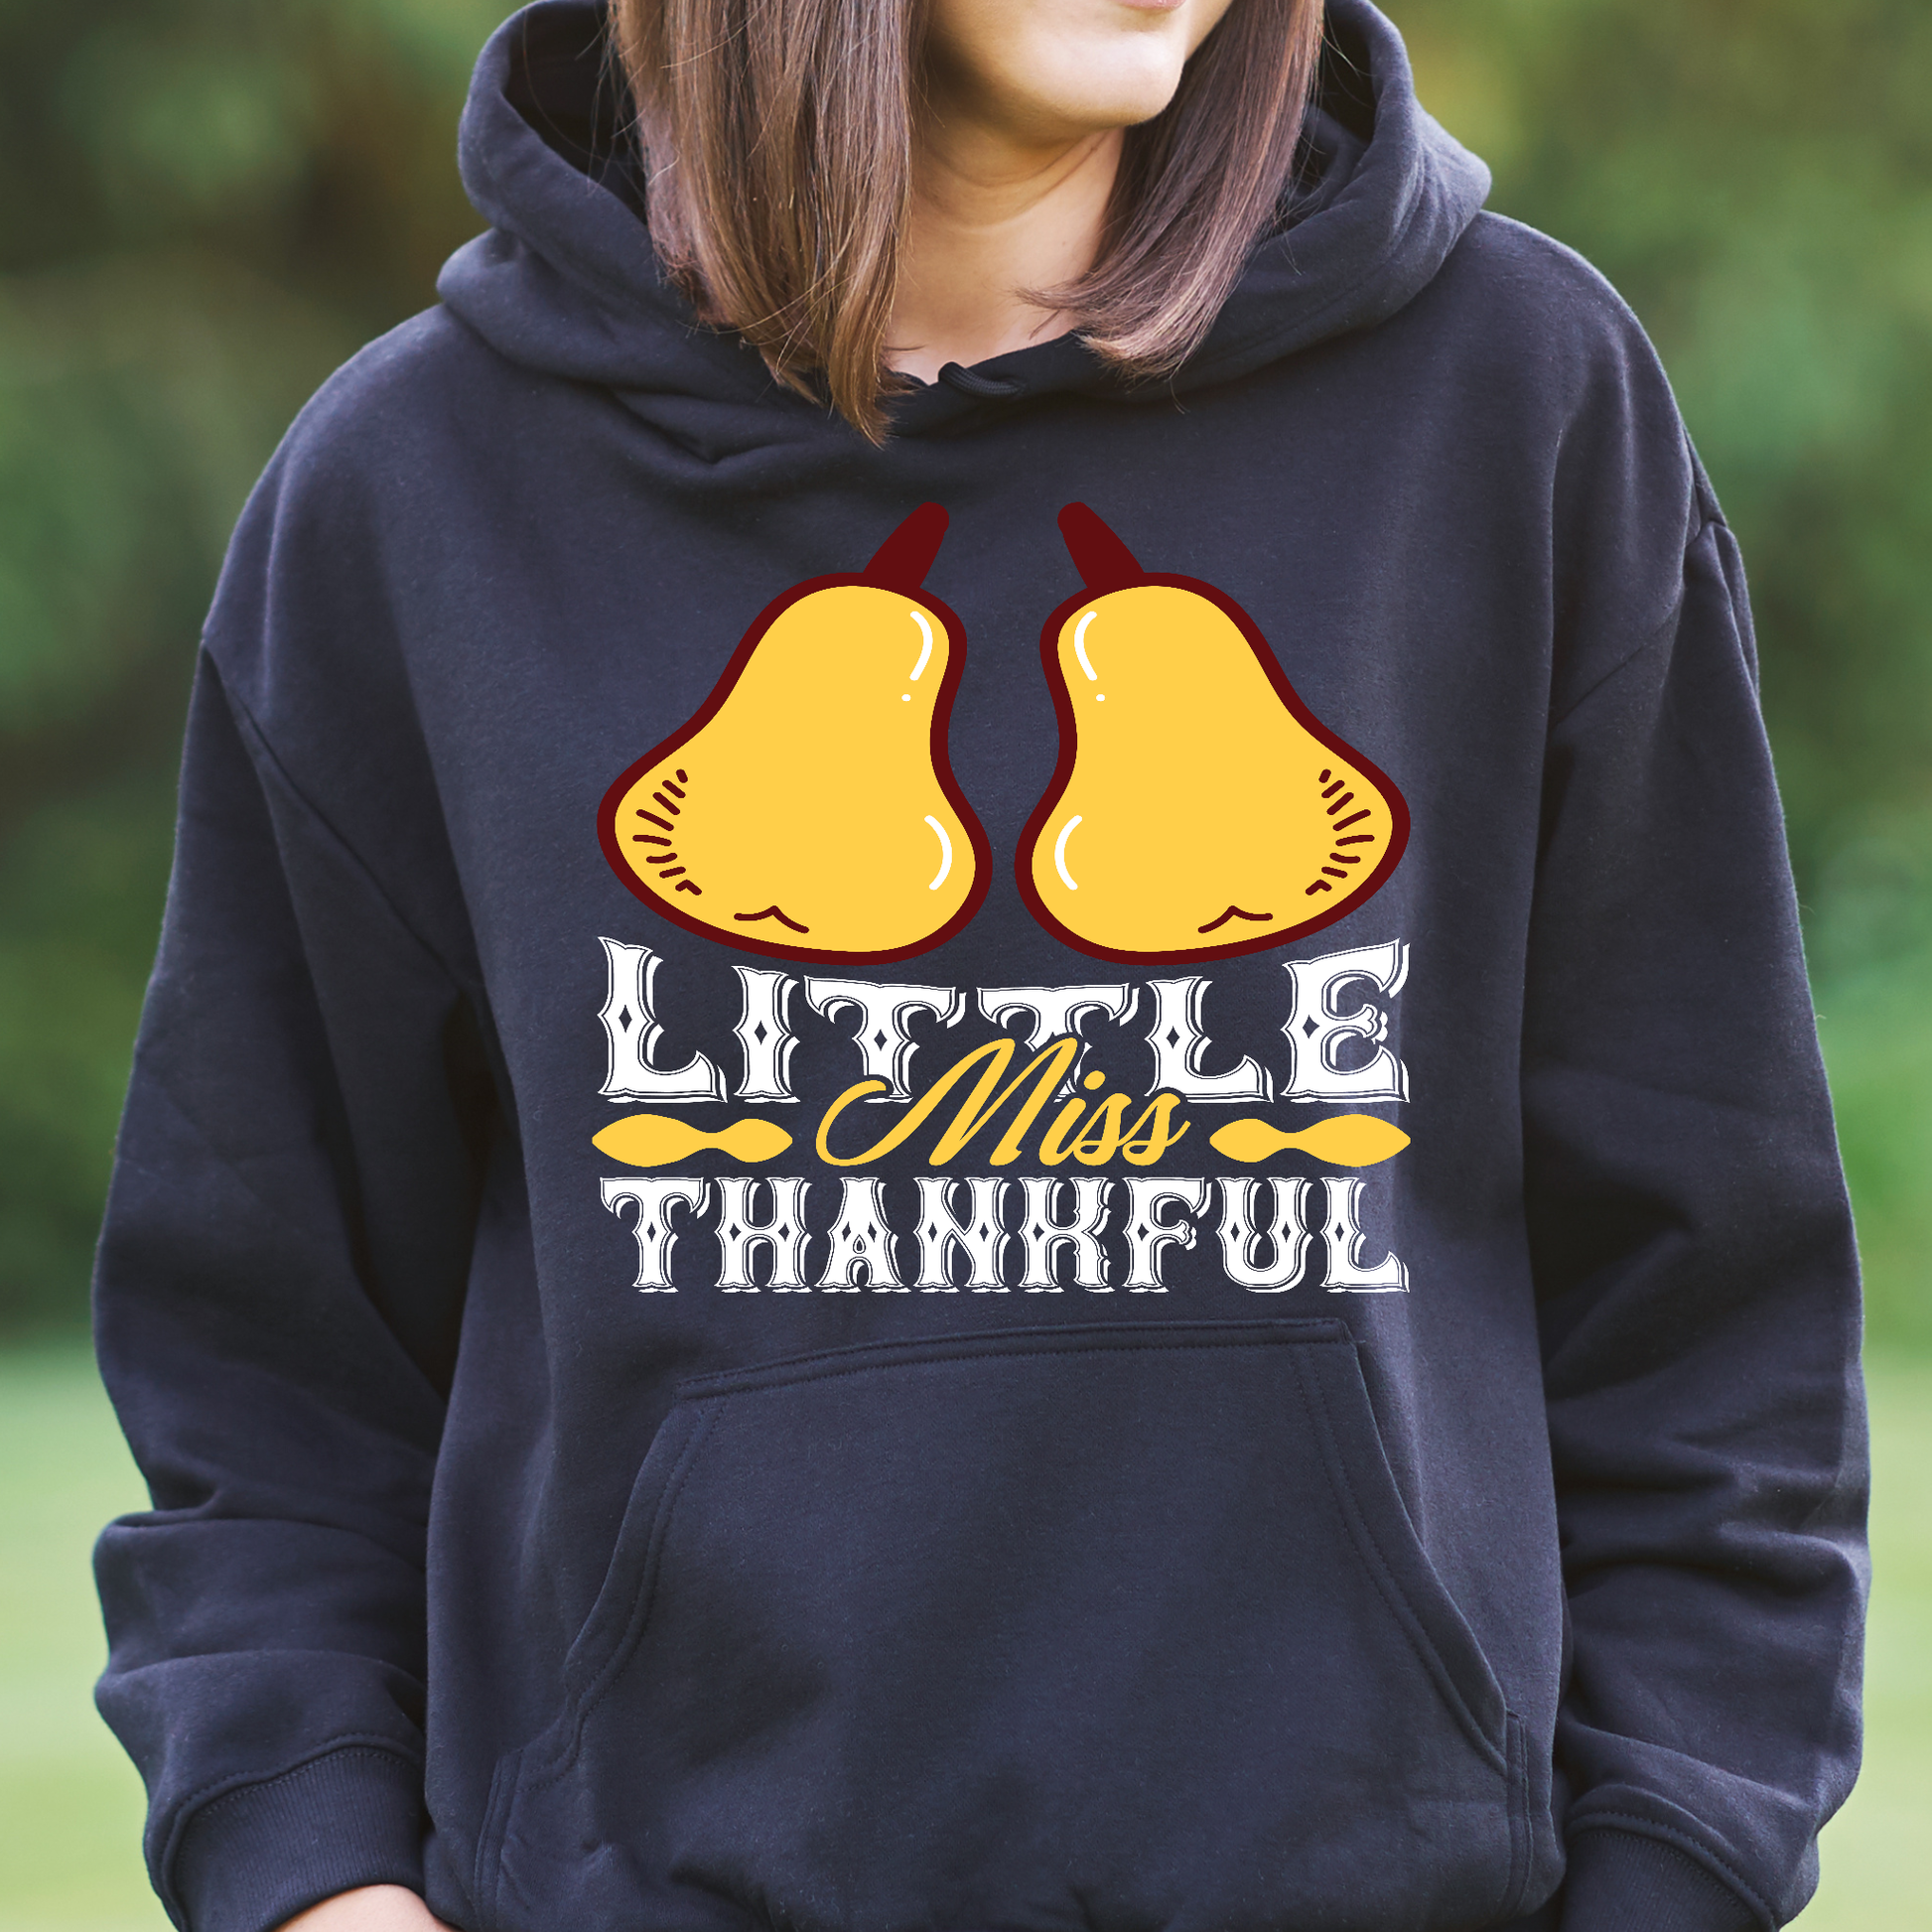 Let go of what you can't change Women's Hoodie - Premium t-shirt from Lees Krazy Teez - Just $39.95! Shop now at Lees Krazy Teez